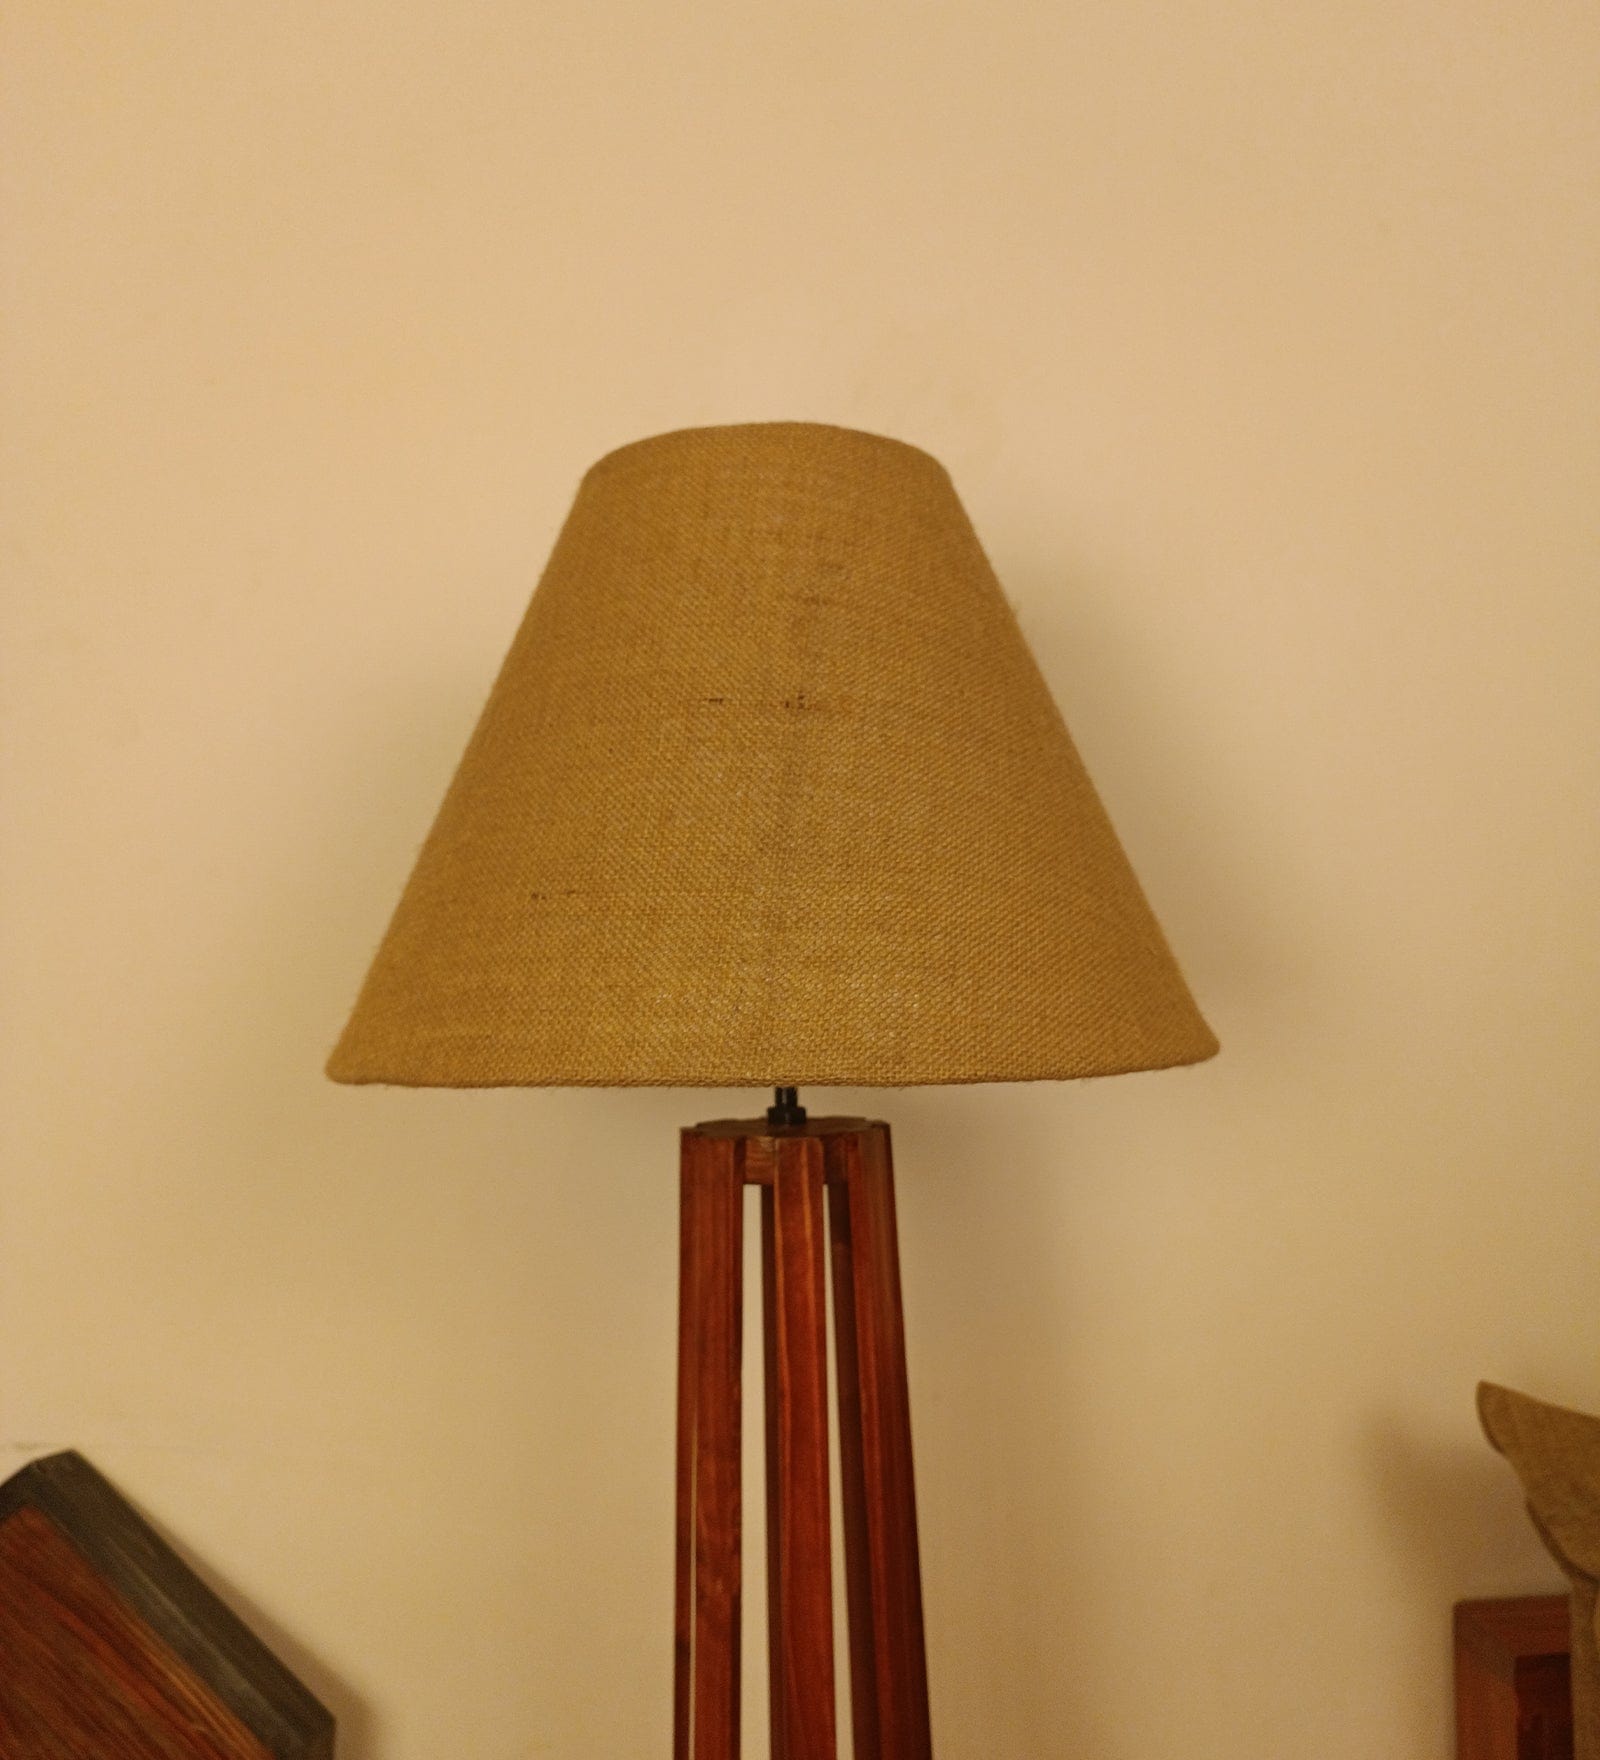 Tall Boy Wooden Floor Lamp With Yellow Printed Fabric Lampshade (BULB NOT INCLUDED)